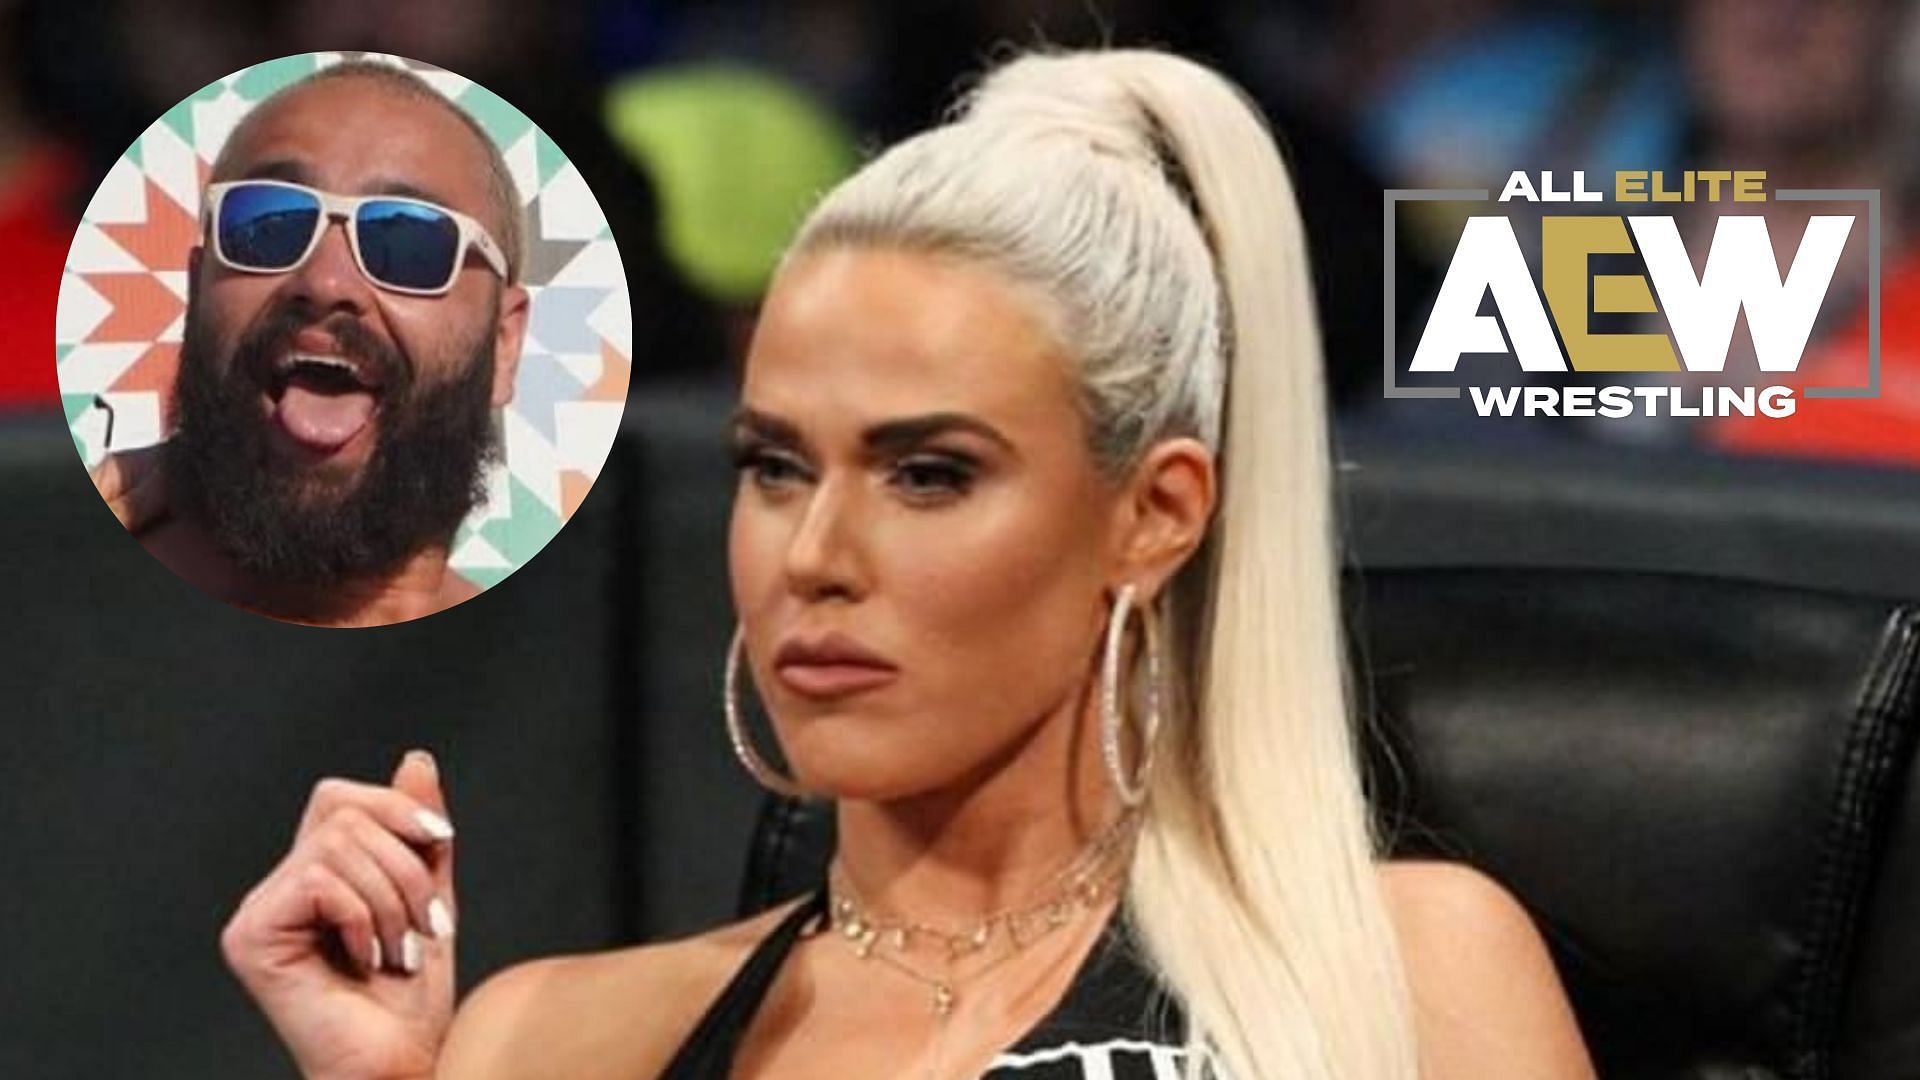 CJ Perry is very curious as to why everyone wants her husband in AEW